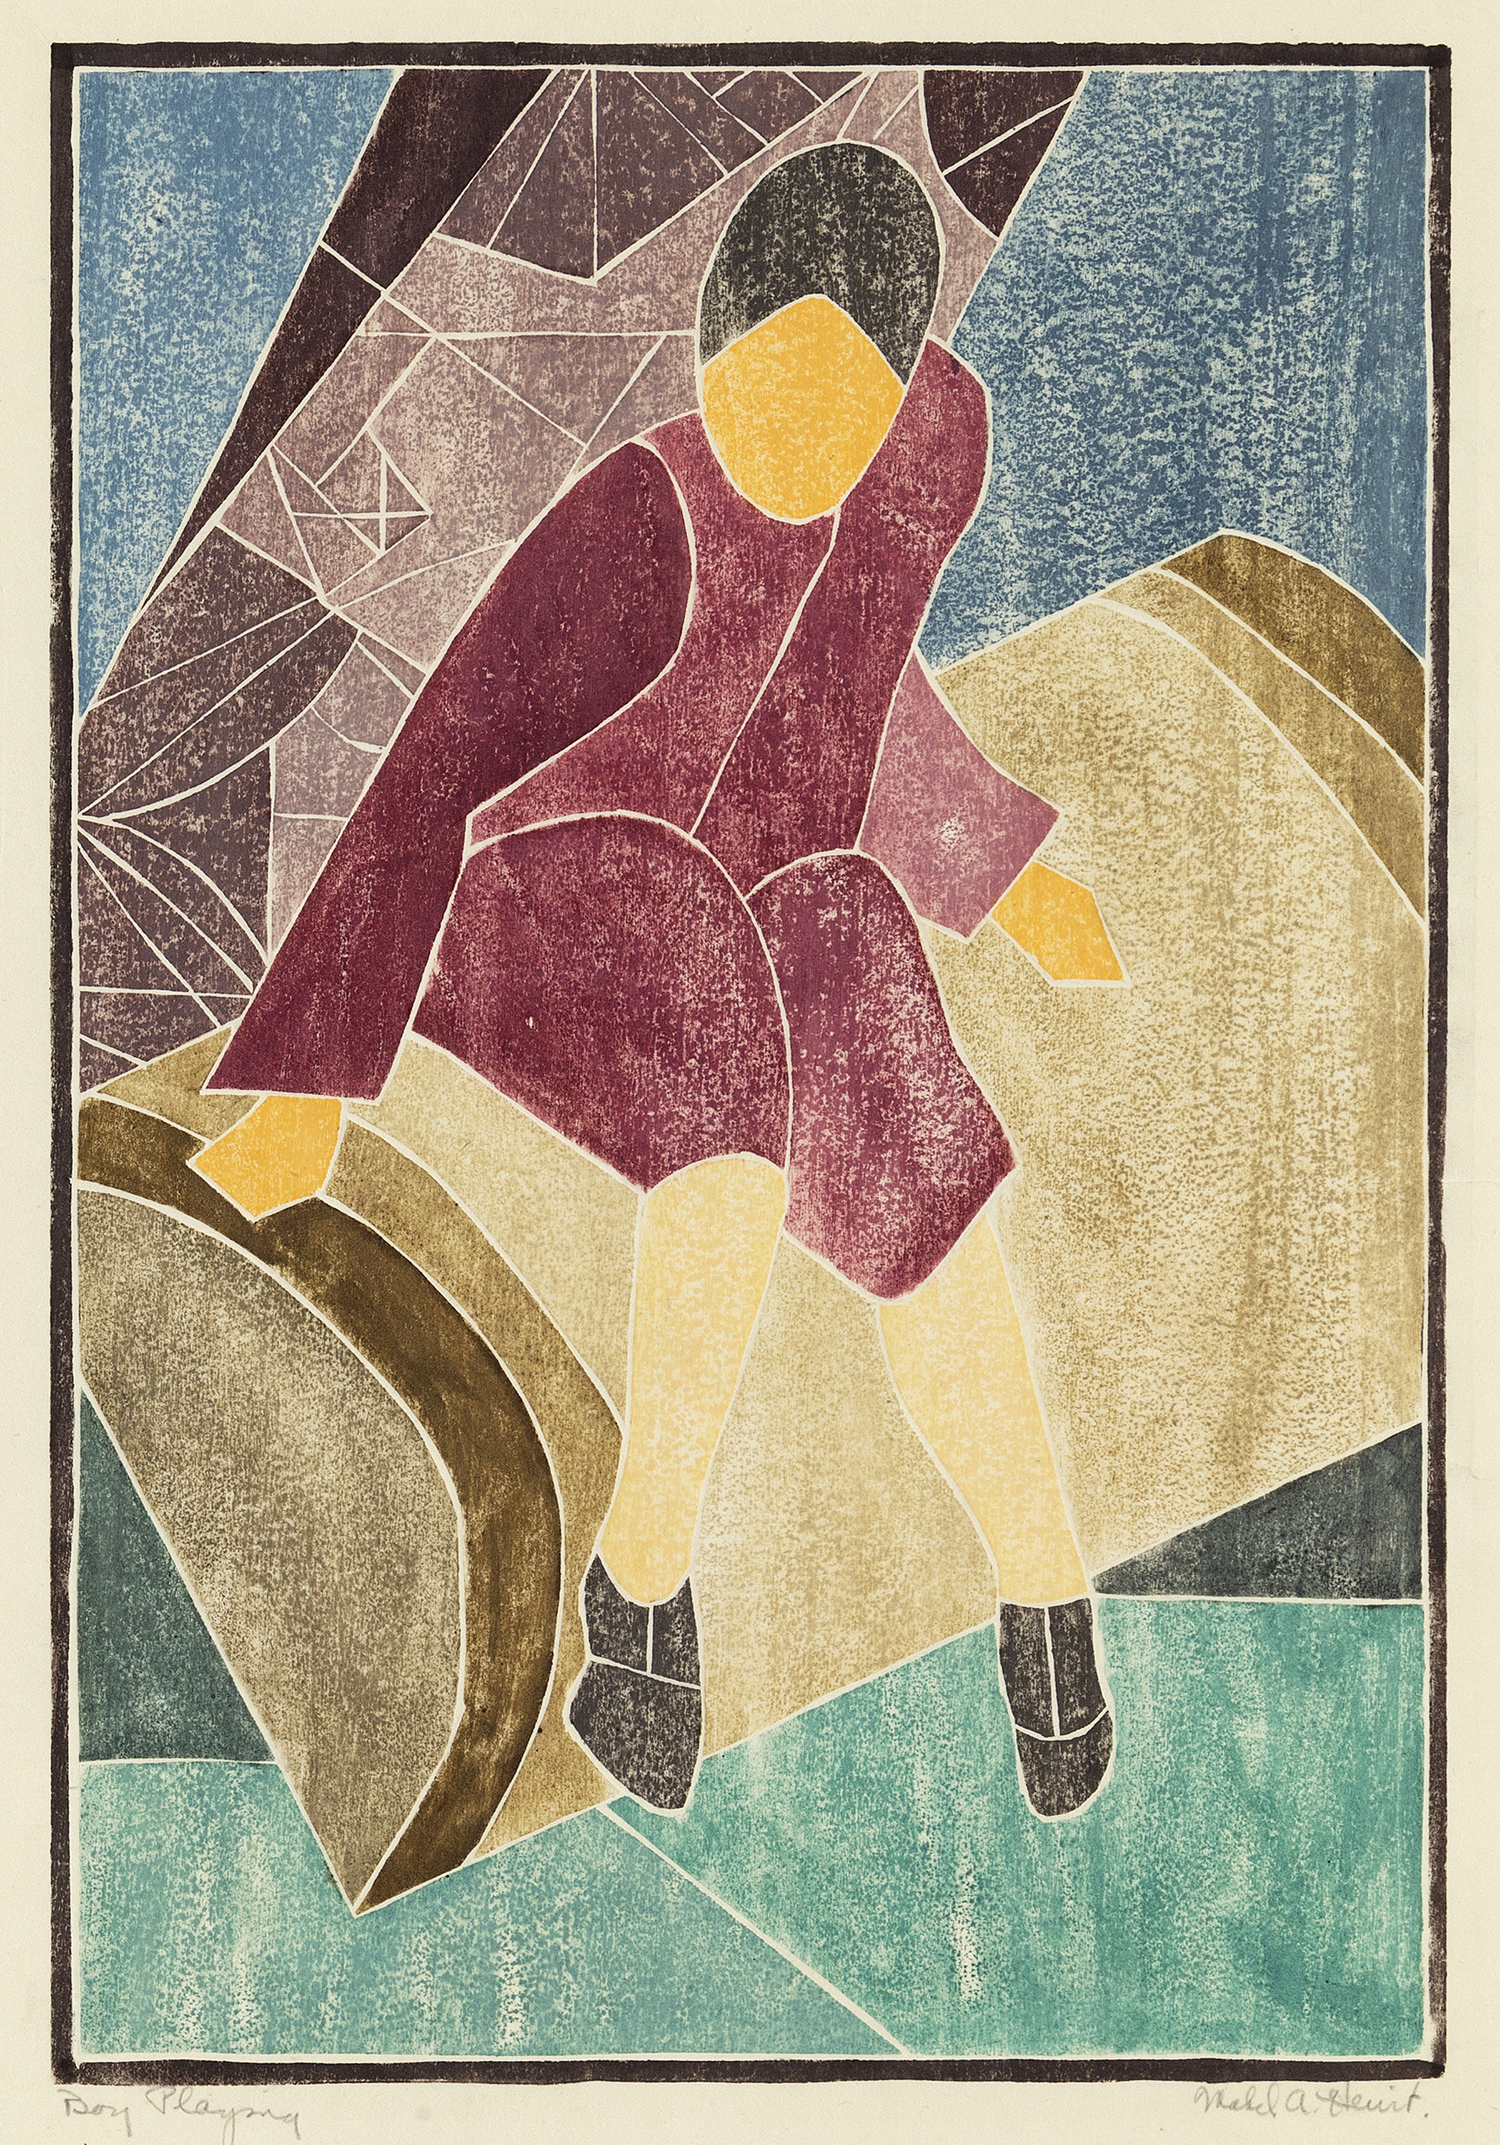 Boy Playing, c.1930, Provincetown white line woodcut, 18 x 13 1/2 inches (45.7 x 34.3 cm), Edition size unknown, rare